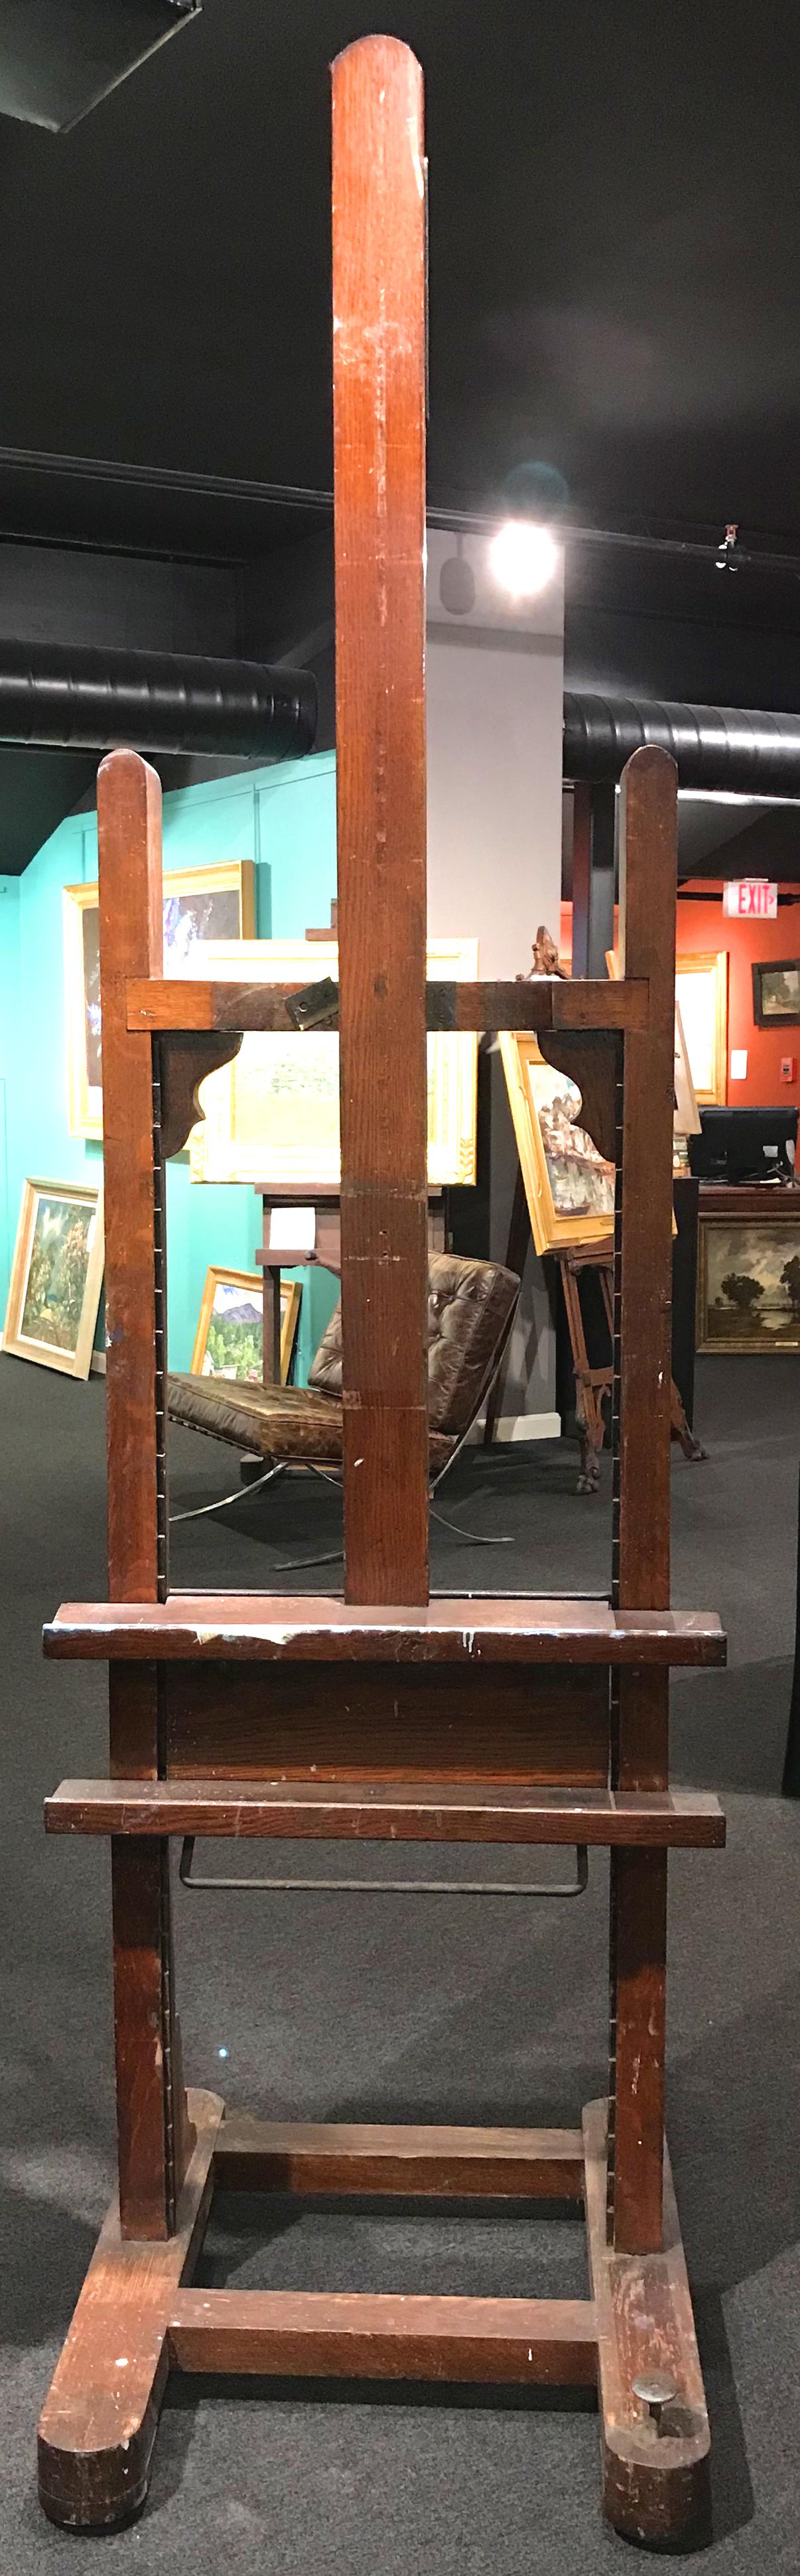 This fine wooden artist’s painting easel, circa 1900, belonged to well known American artist Charles Herbert Woodbury (1864-1940). Woodbury was born in Lynn, MA and graduated from MIT, but went on to become a well known impressionist artist and